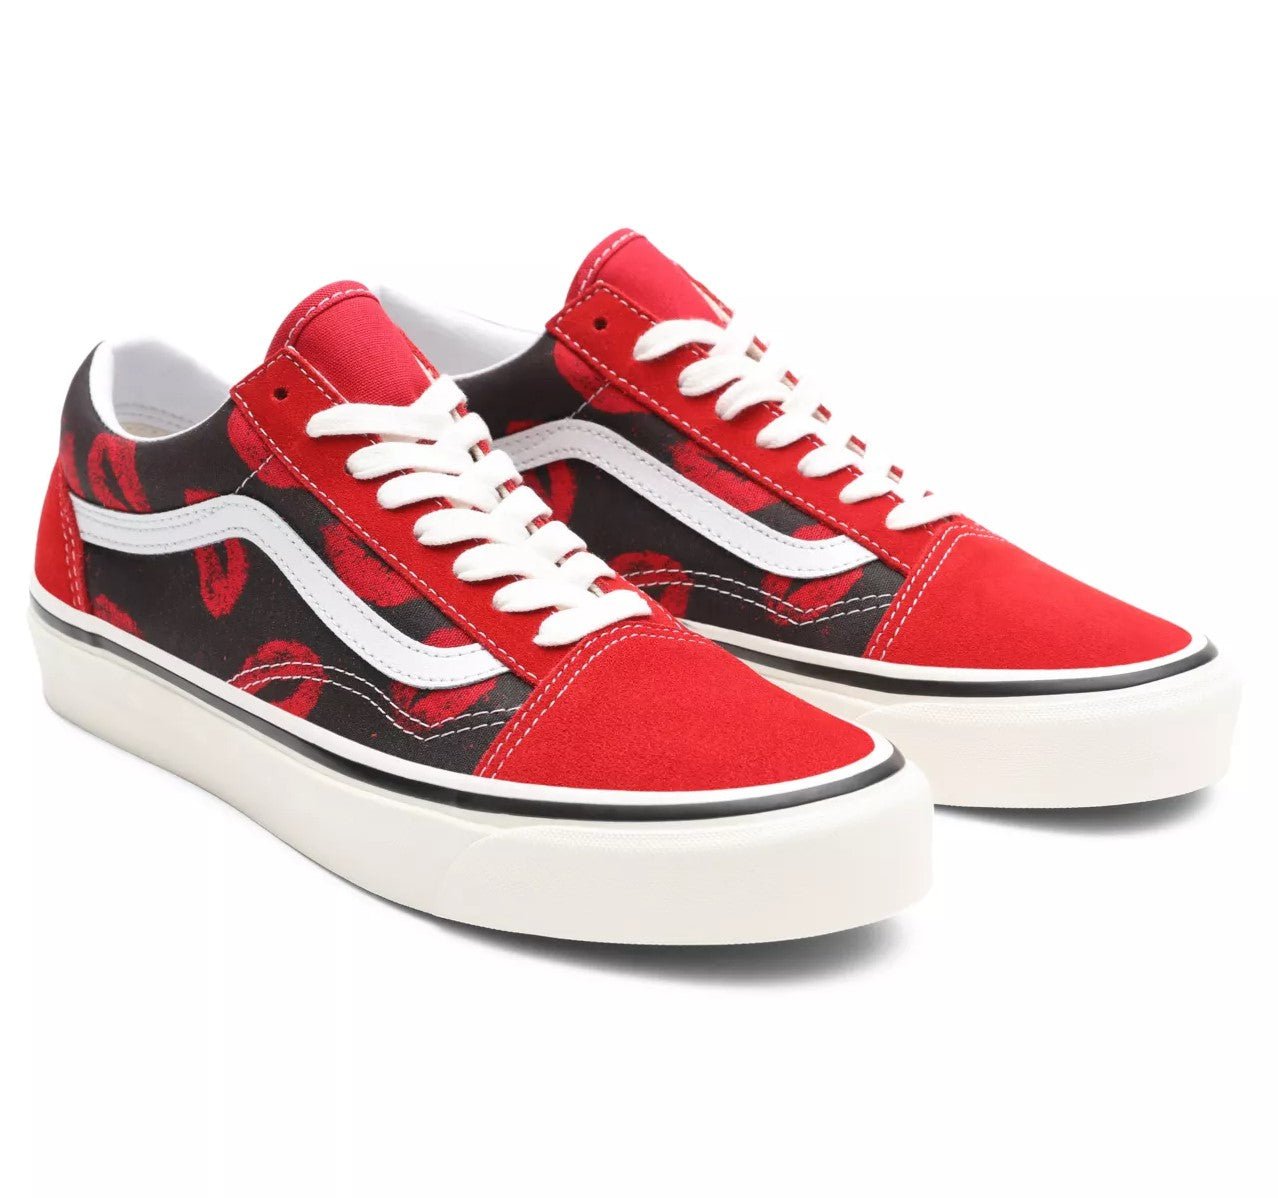 Anaheim Factory Old Skool 36 DX Size 12 Sneaker by Vans Shoes – Paint Art Collection